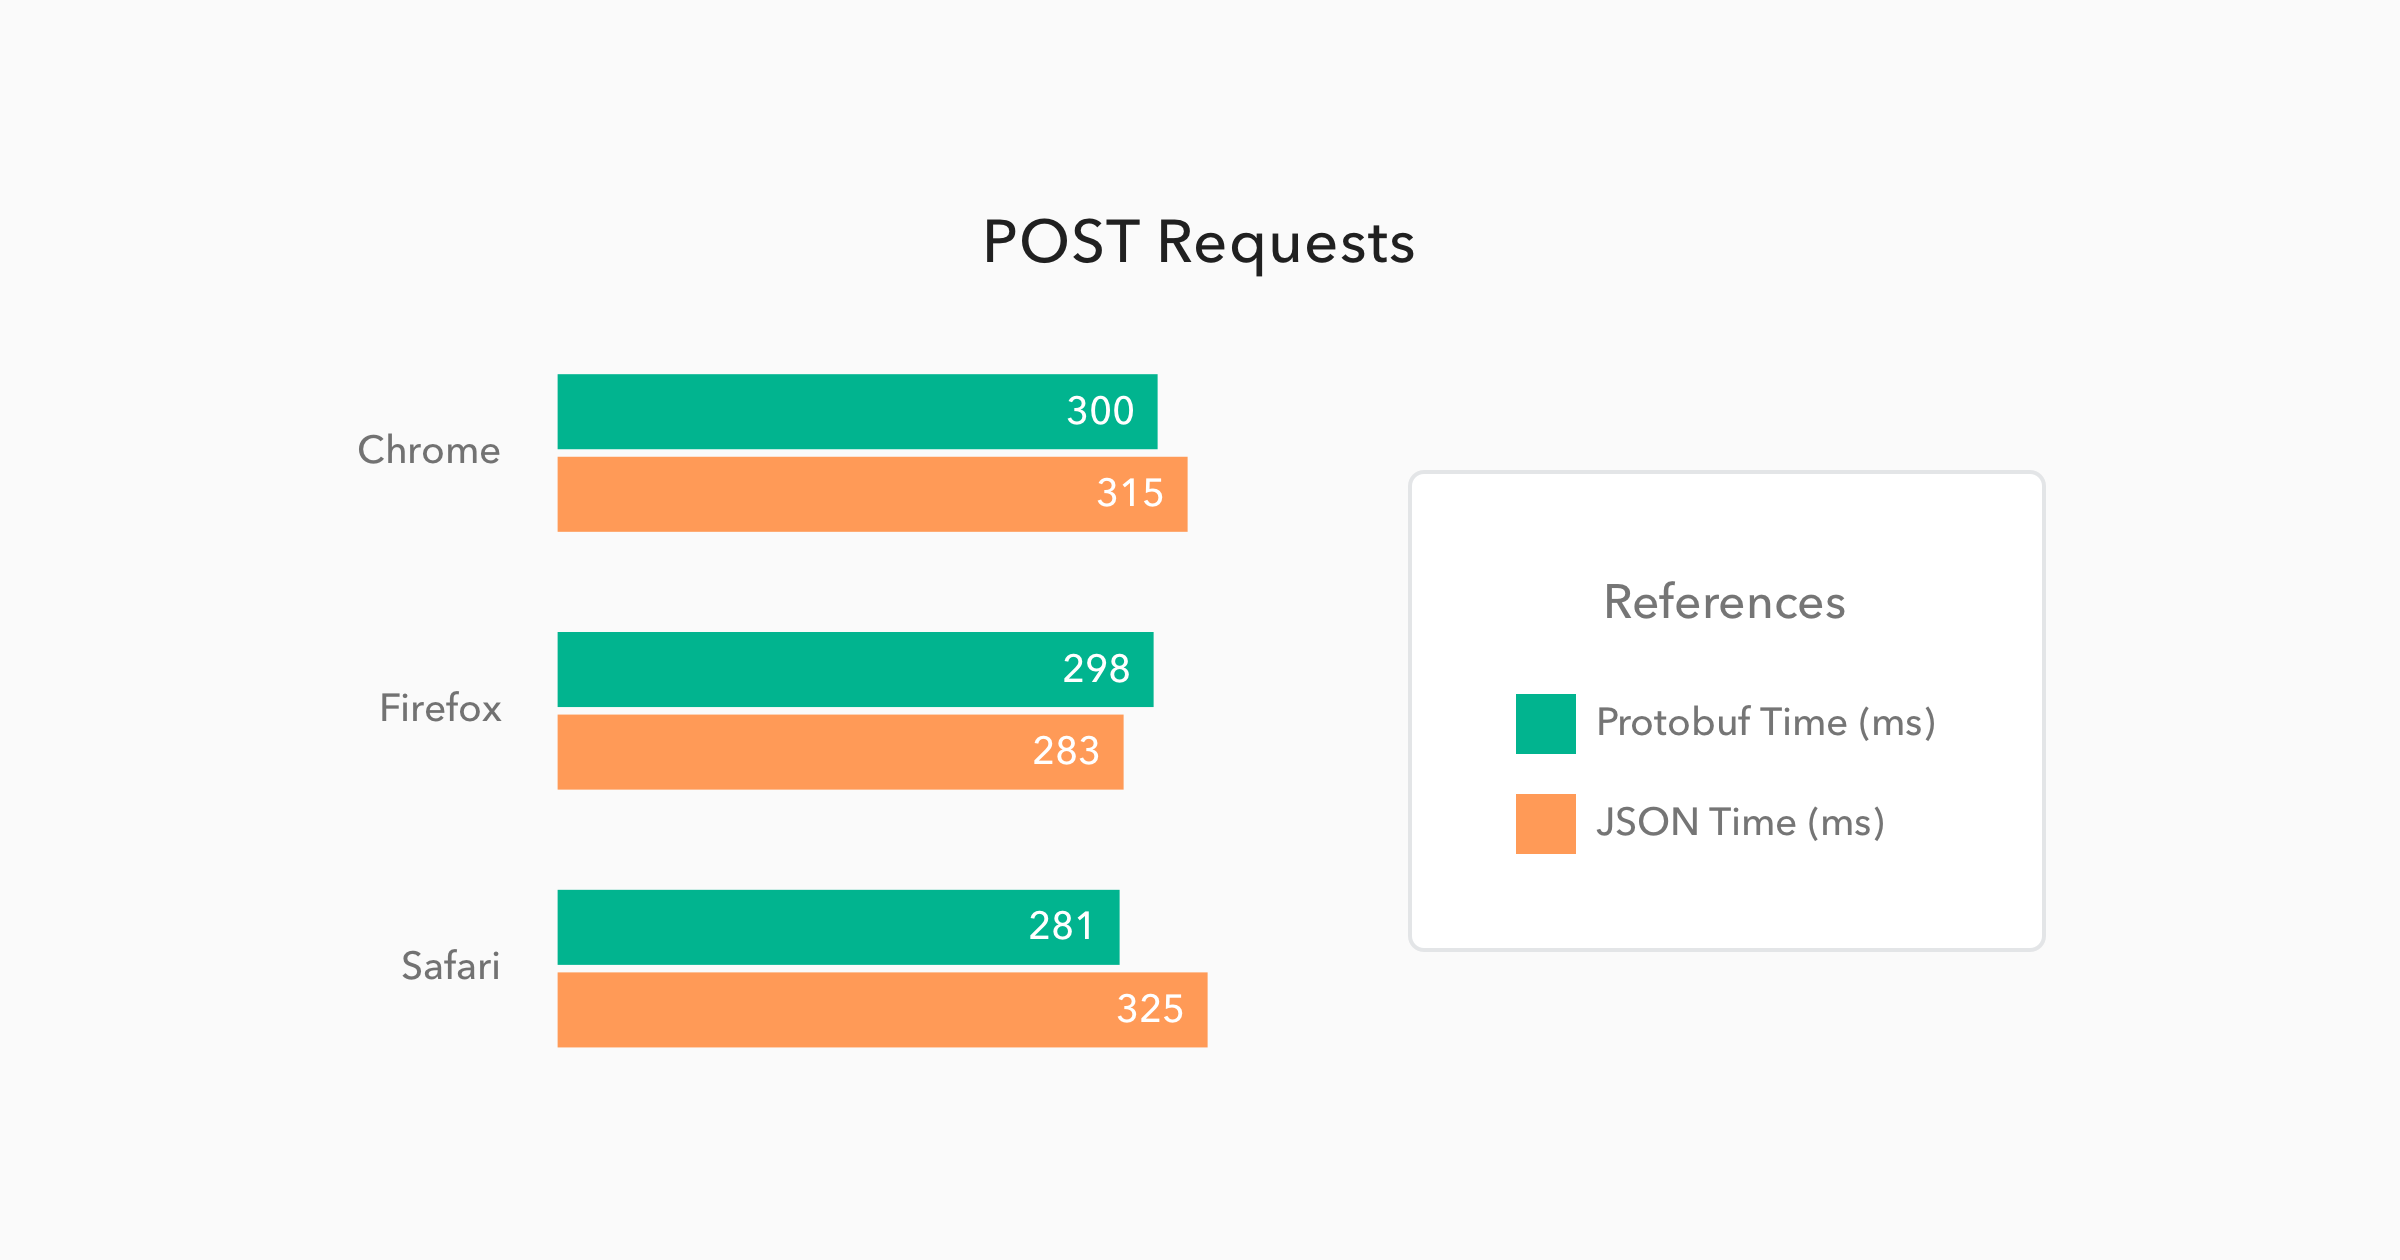 Comparison of Protobuf/JSON performance on POST requests